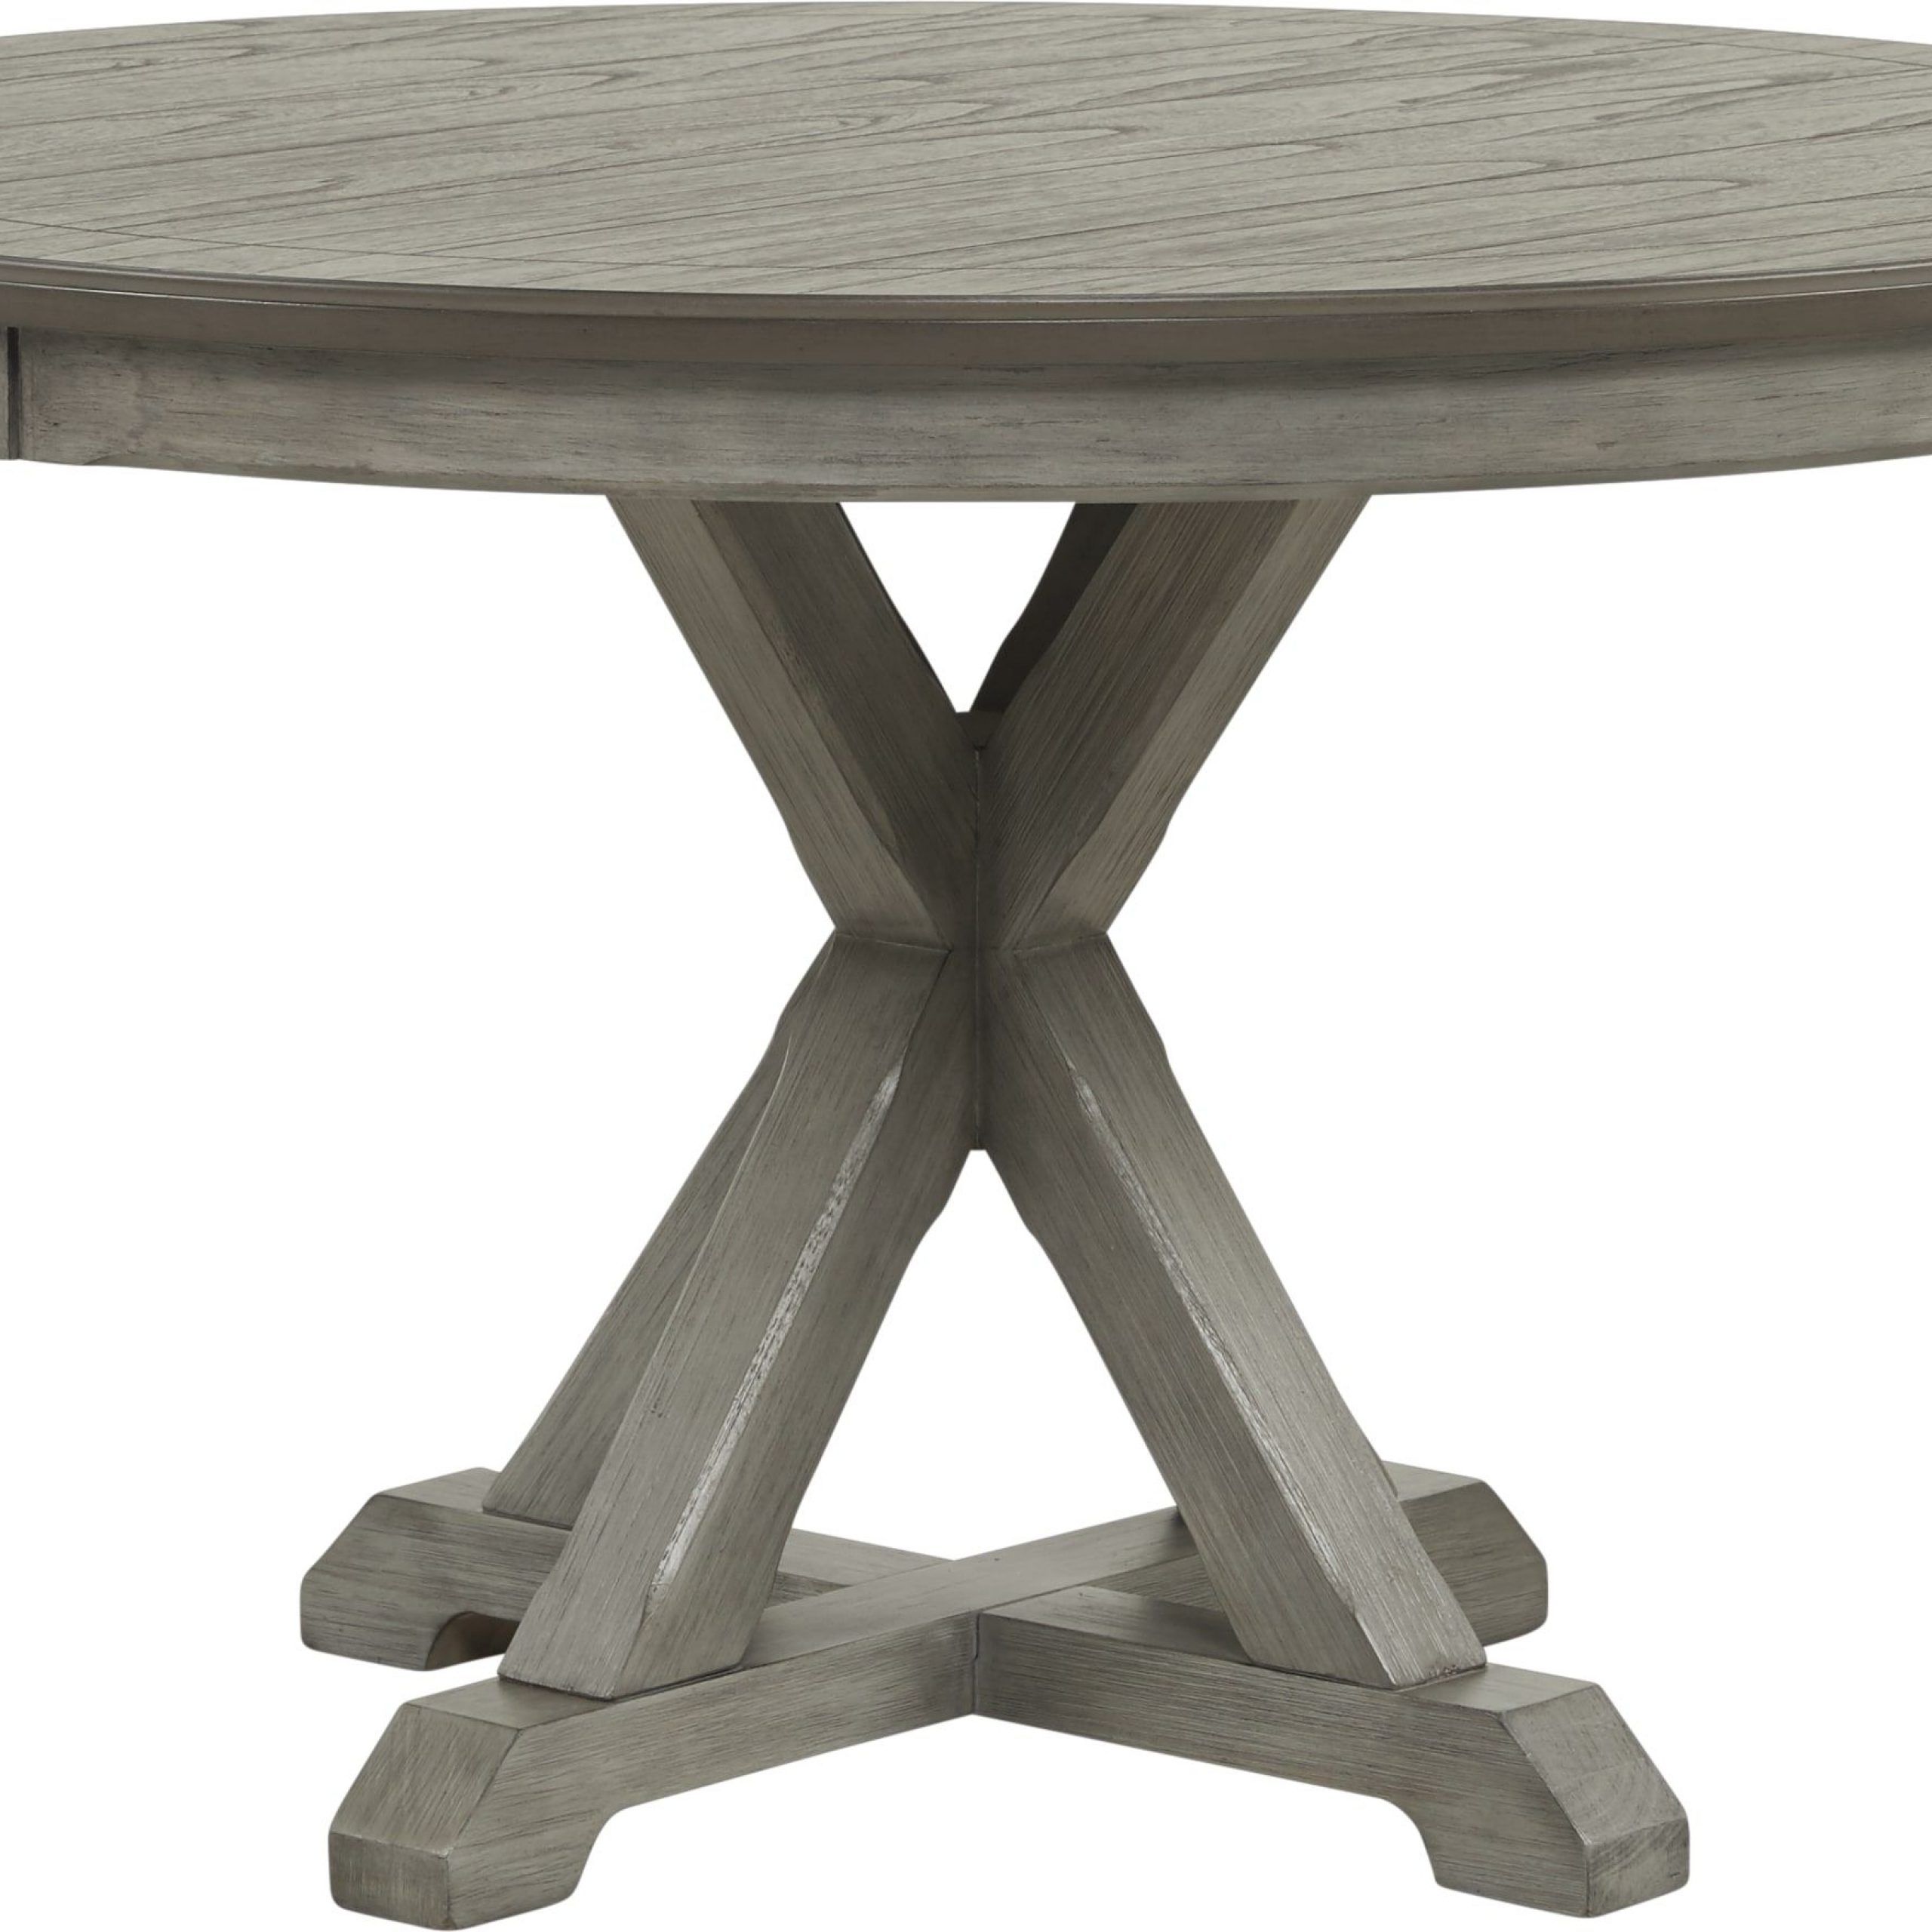 Hart Reclaimed Wood Extending Dining Tables Throughout Well Known Nantucket Breeze Gray Round Dining Table .399. (View 14 of 25)